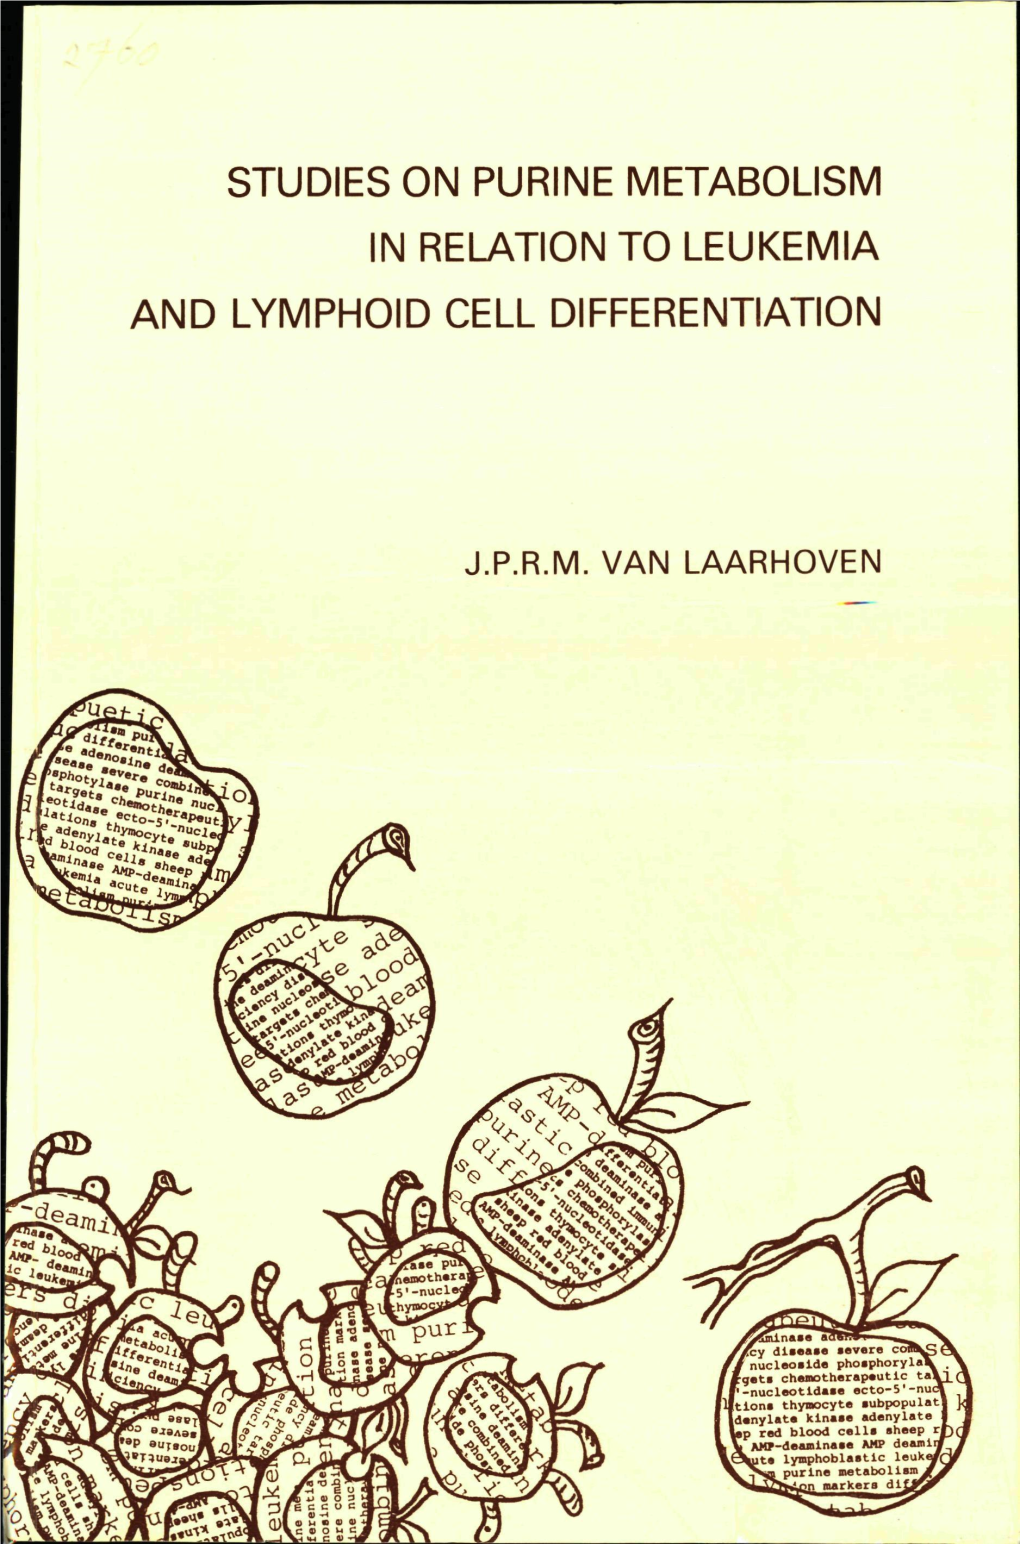 Studies on Purine Metabolism in Relation to Leukemia and Lymphoid Cell Differentiation